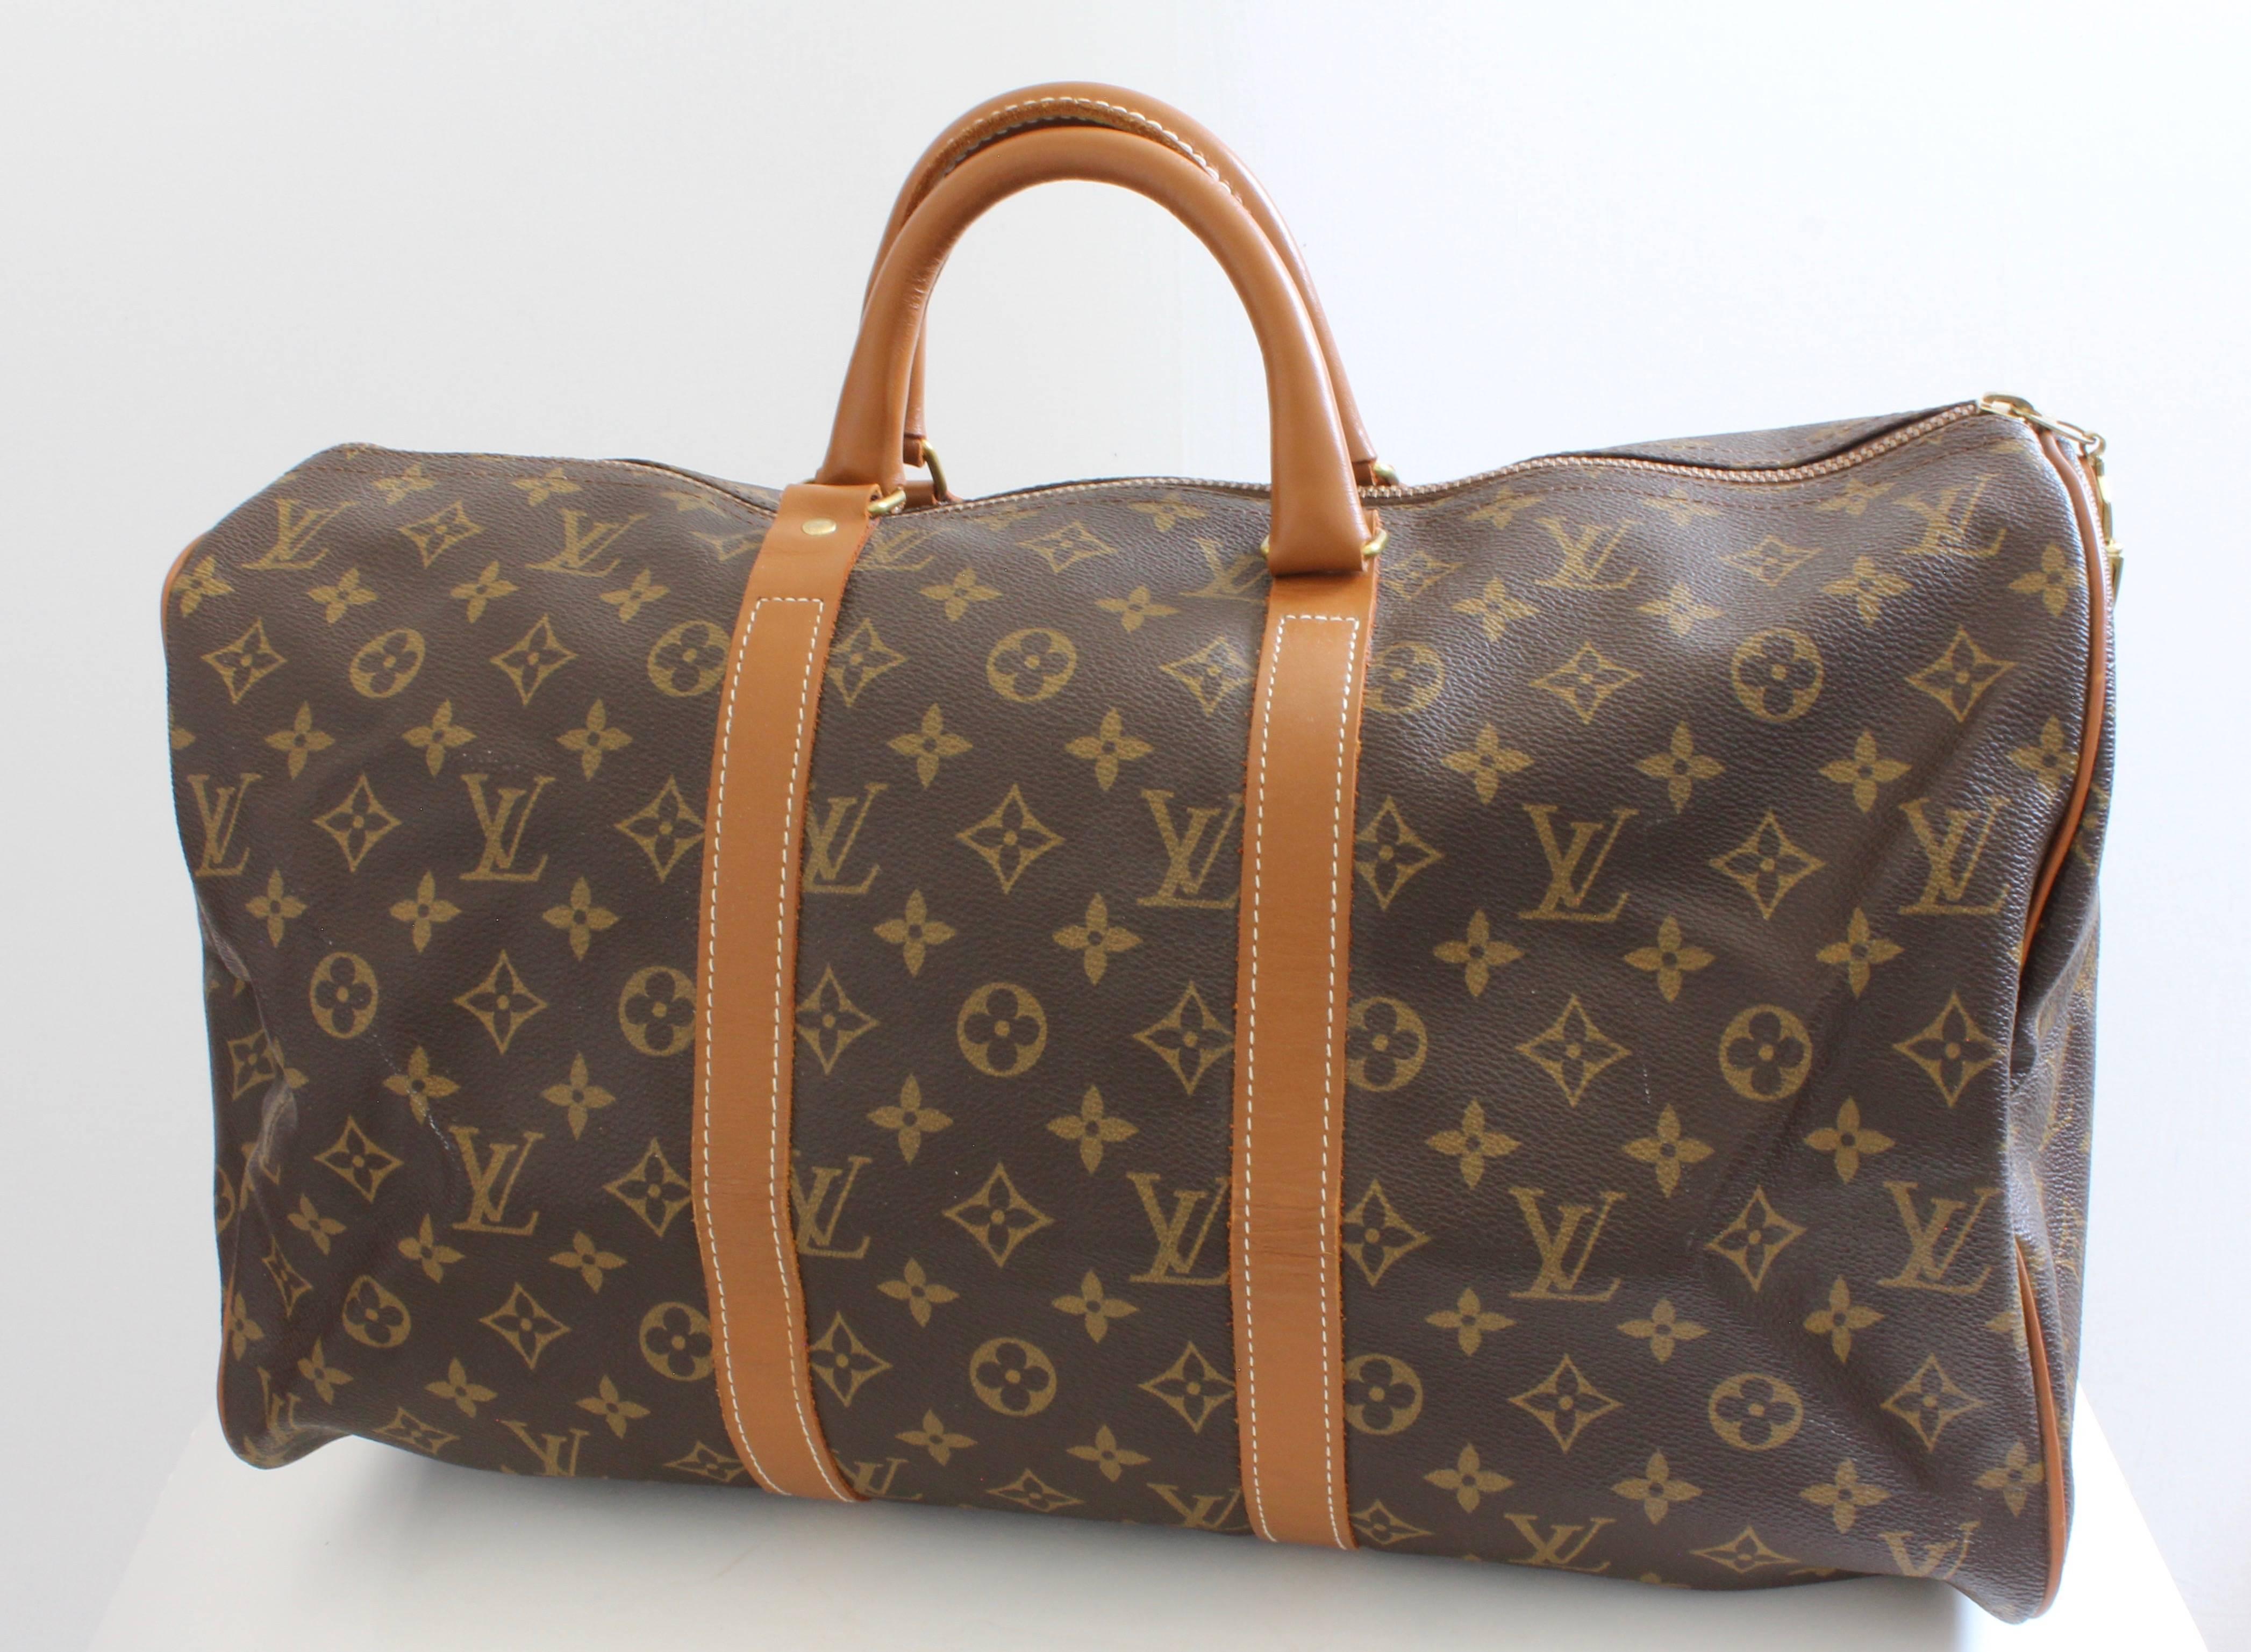 Louis Vuitton by The French Company Monogram Keepall Bag Travel Duffle 45cm  2